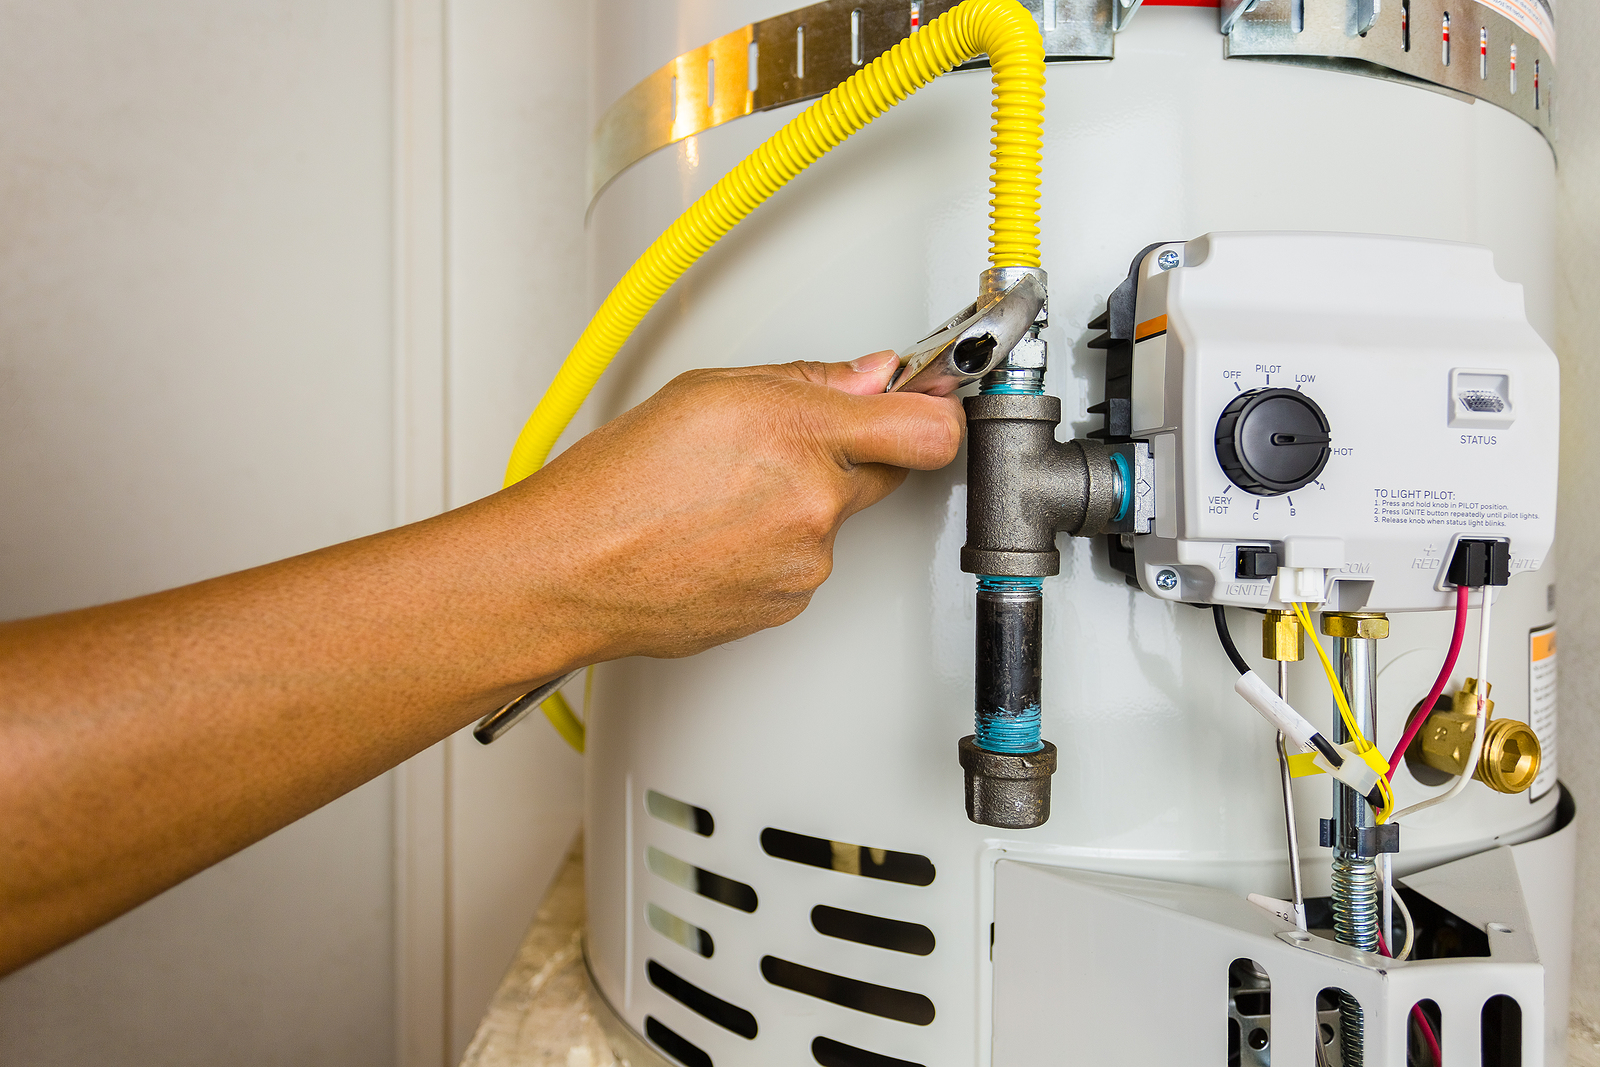 How to change the anode on this water heater? - Home Improvement